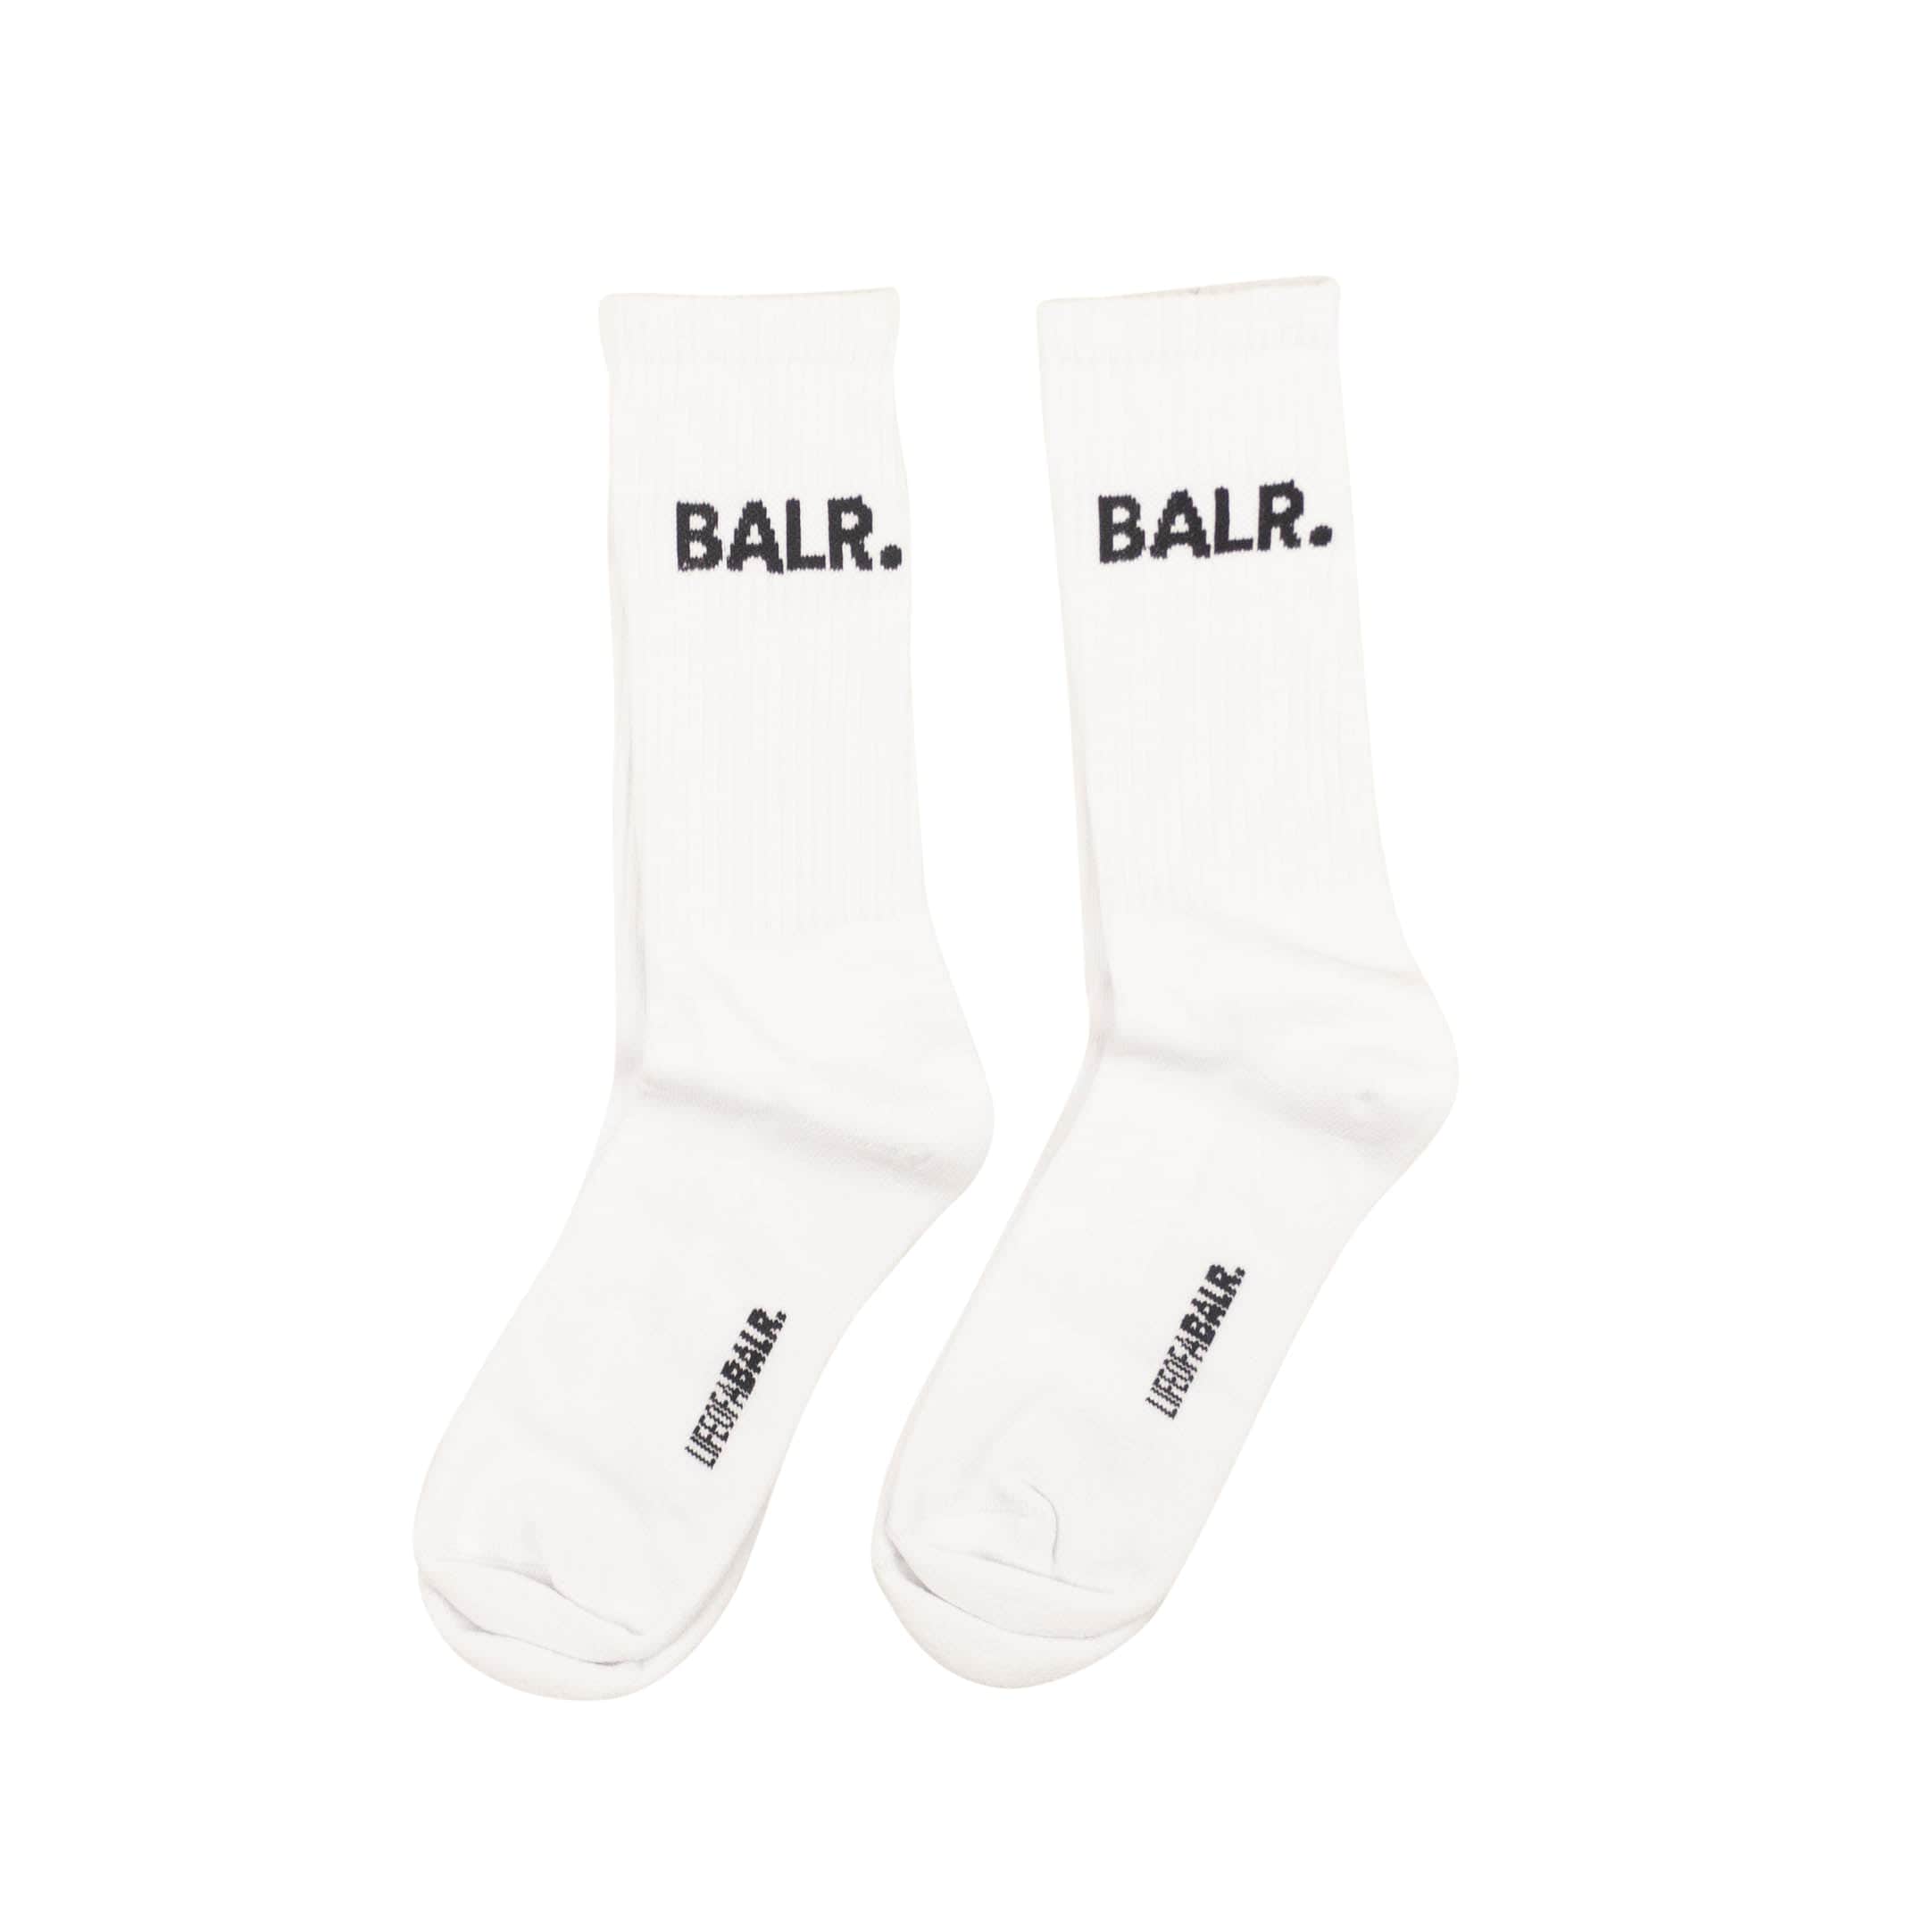 BALR. channelenable-all, chicmi, couponcollection, gender-womens, main-accessories, shop375 White 2 Pack Ribbed Logo Socks